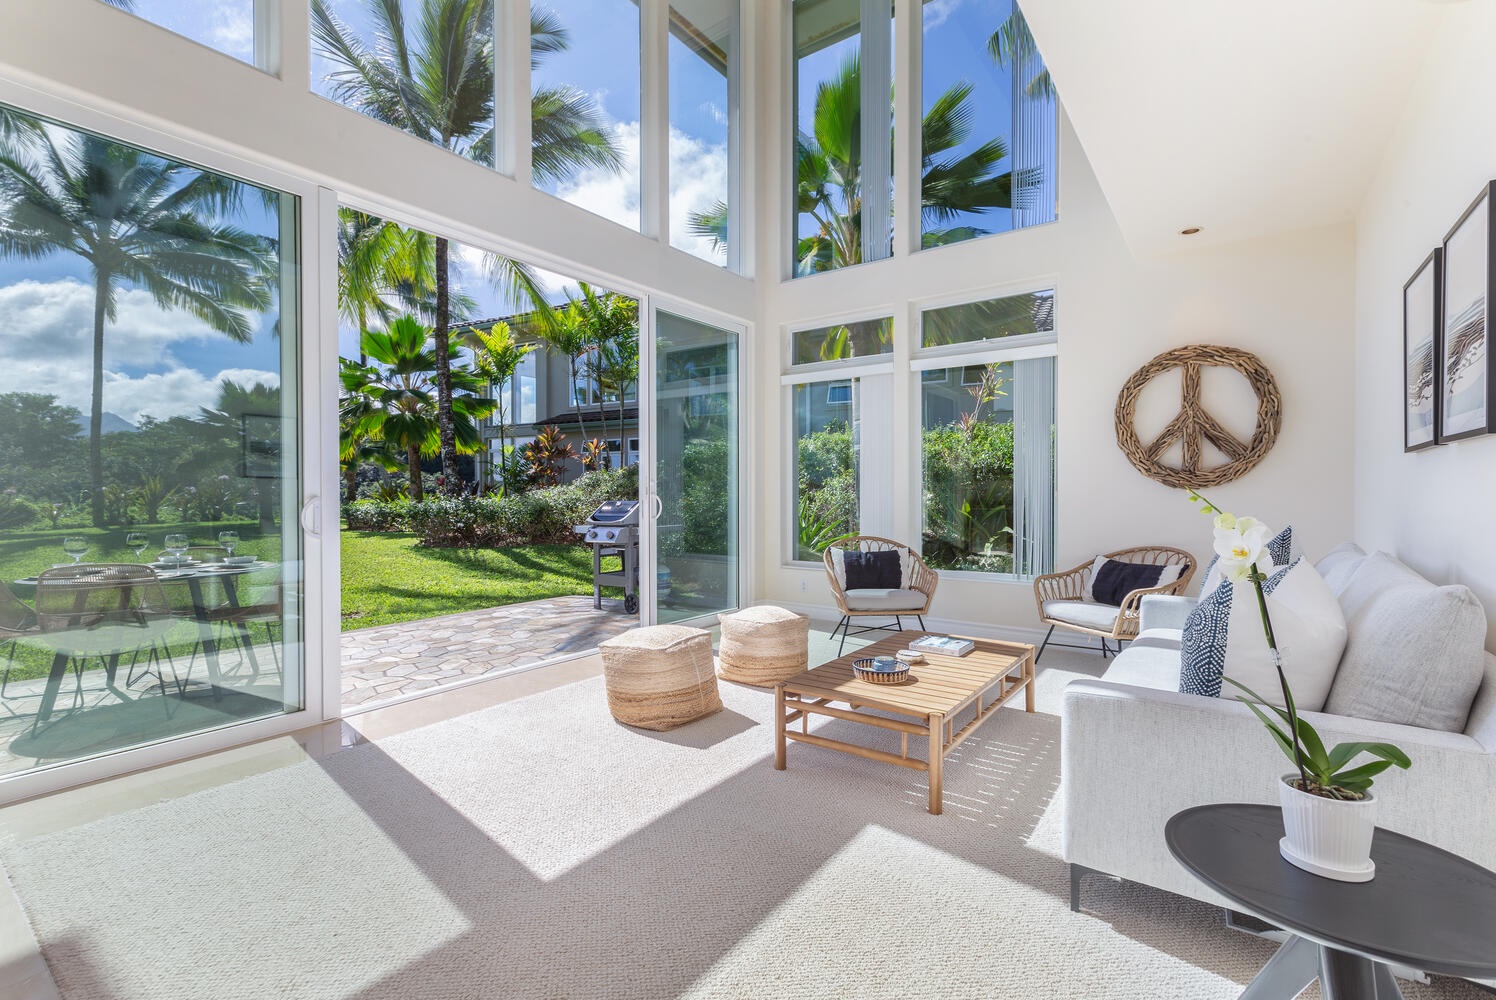 Princeville Vacation Rentals, Kai Naia Hale - Downstairs Family room opens up to lanai and beautiful garden